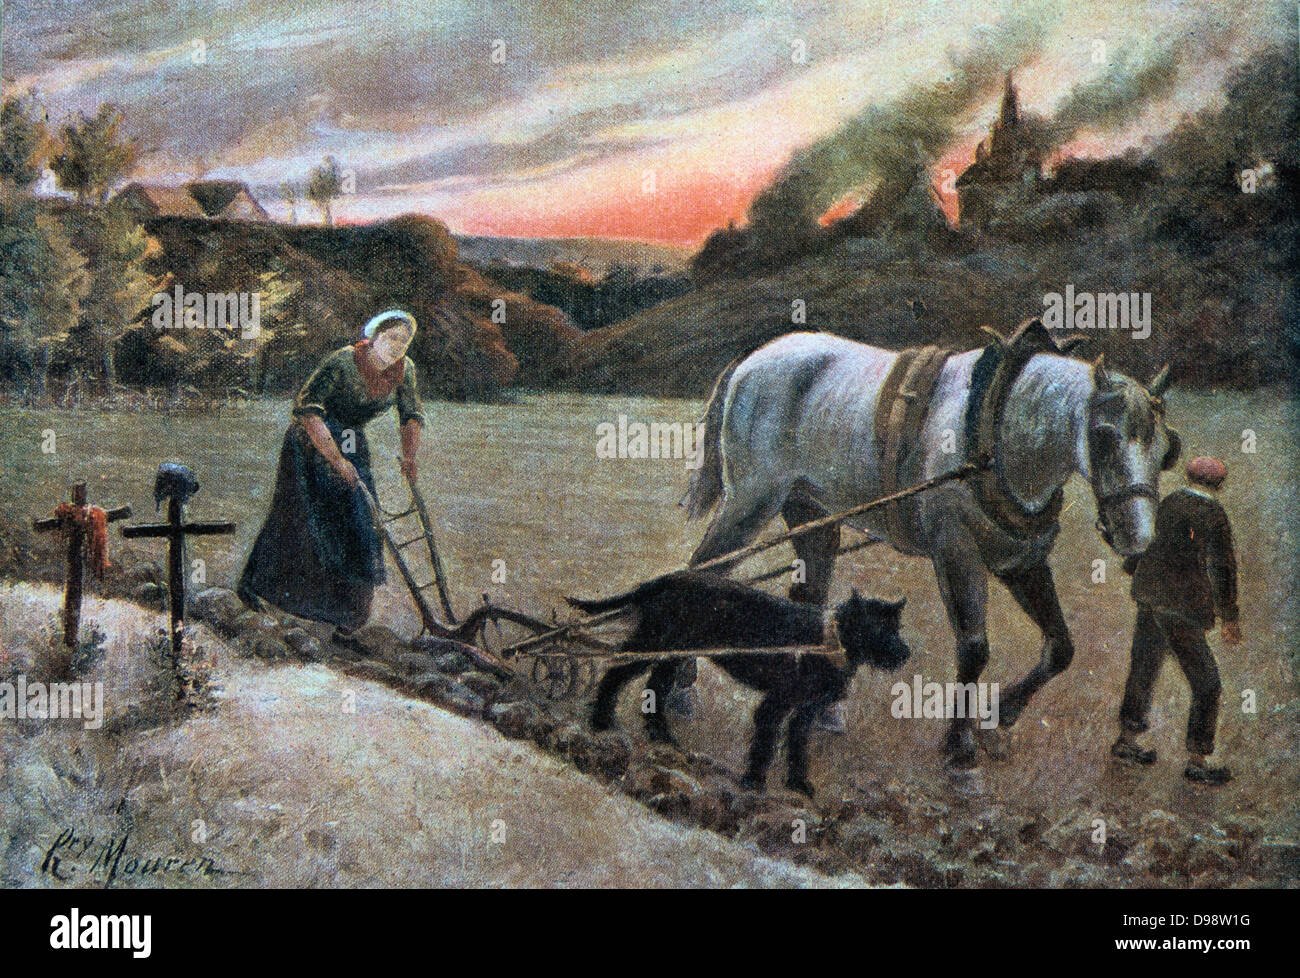 Women in the Fields' France 1915, World War I. Henri Laurent Mouren (1844-1926) French painter. Woman and boy ploughing with horse and dog harnessed together. Two graves marked by crosses, left. Hardship Agriculture Stock Photo